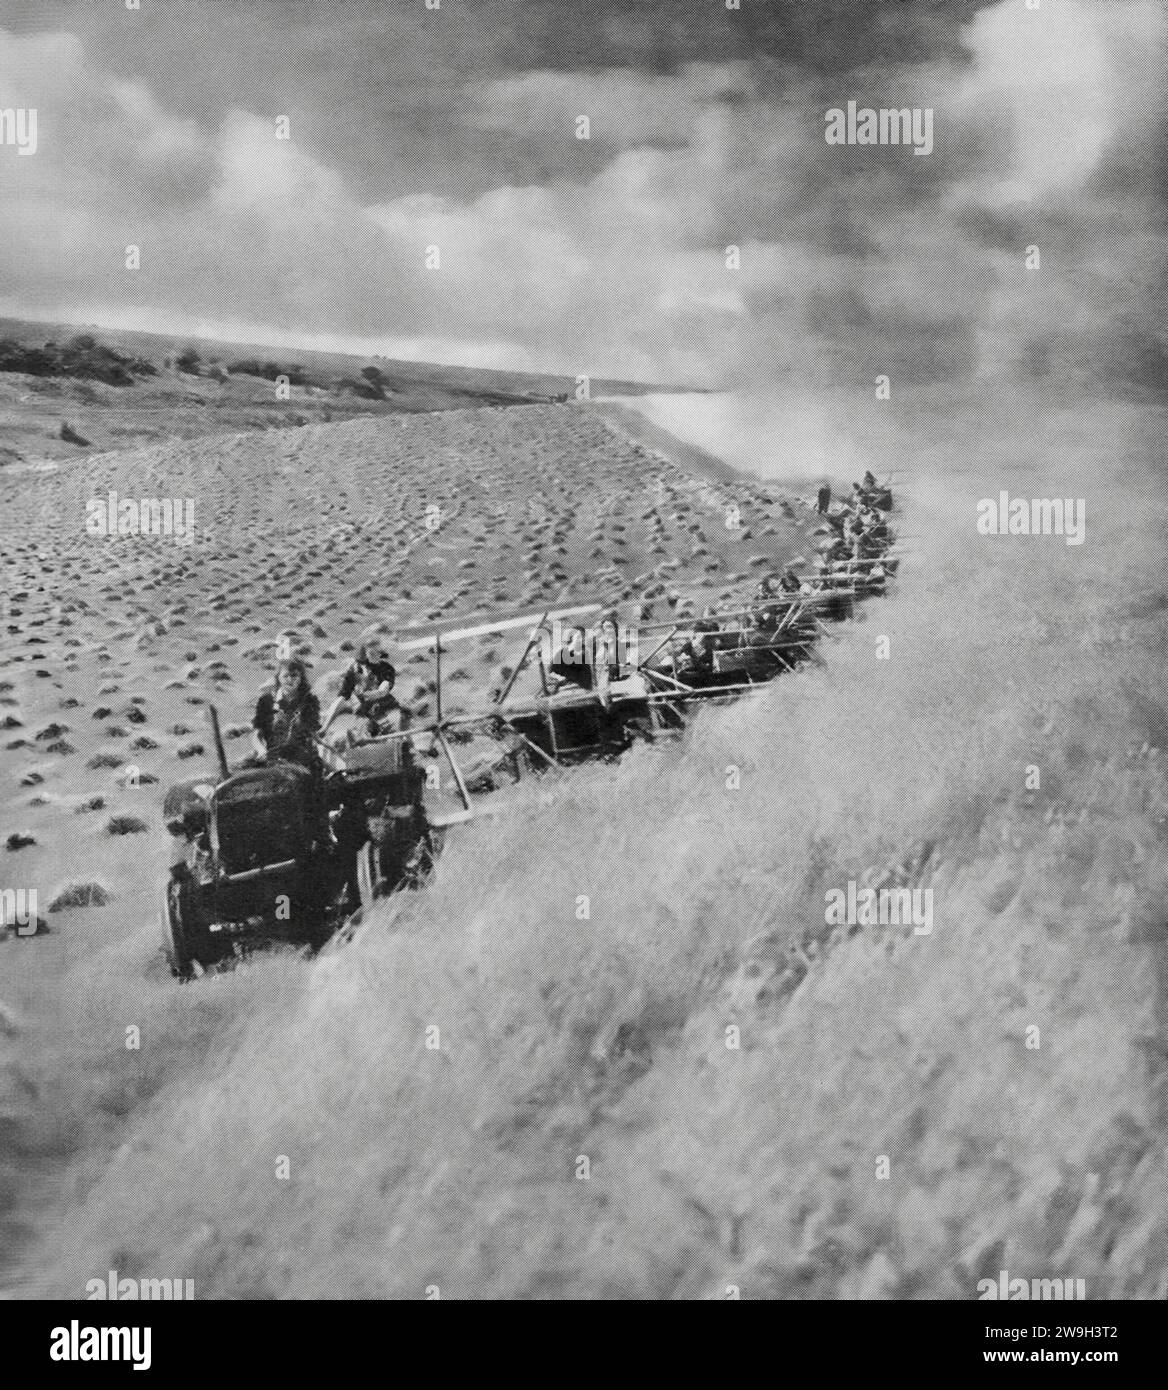 The Women's Land Army operating tractors and combined harvesters on the South Downs in Kent, in the autumn of 1942 during the Second World War. Women took over the work of male agricultural workers, who were released for other wartime duties. Stock Photo